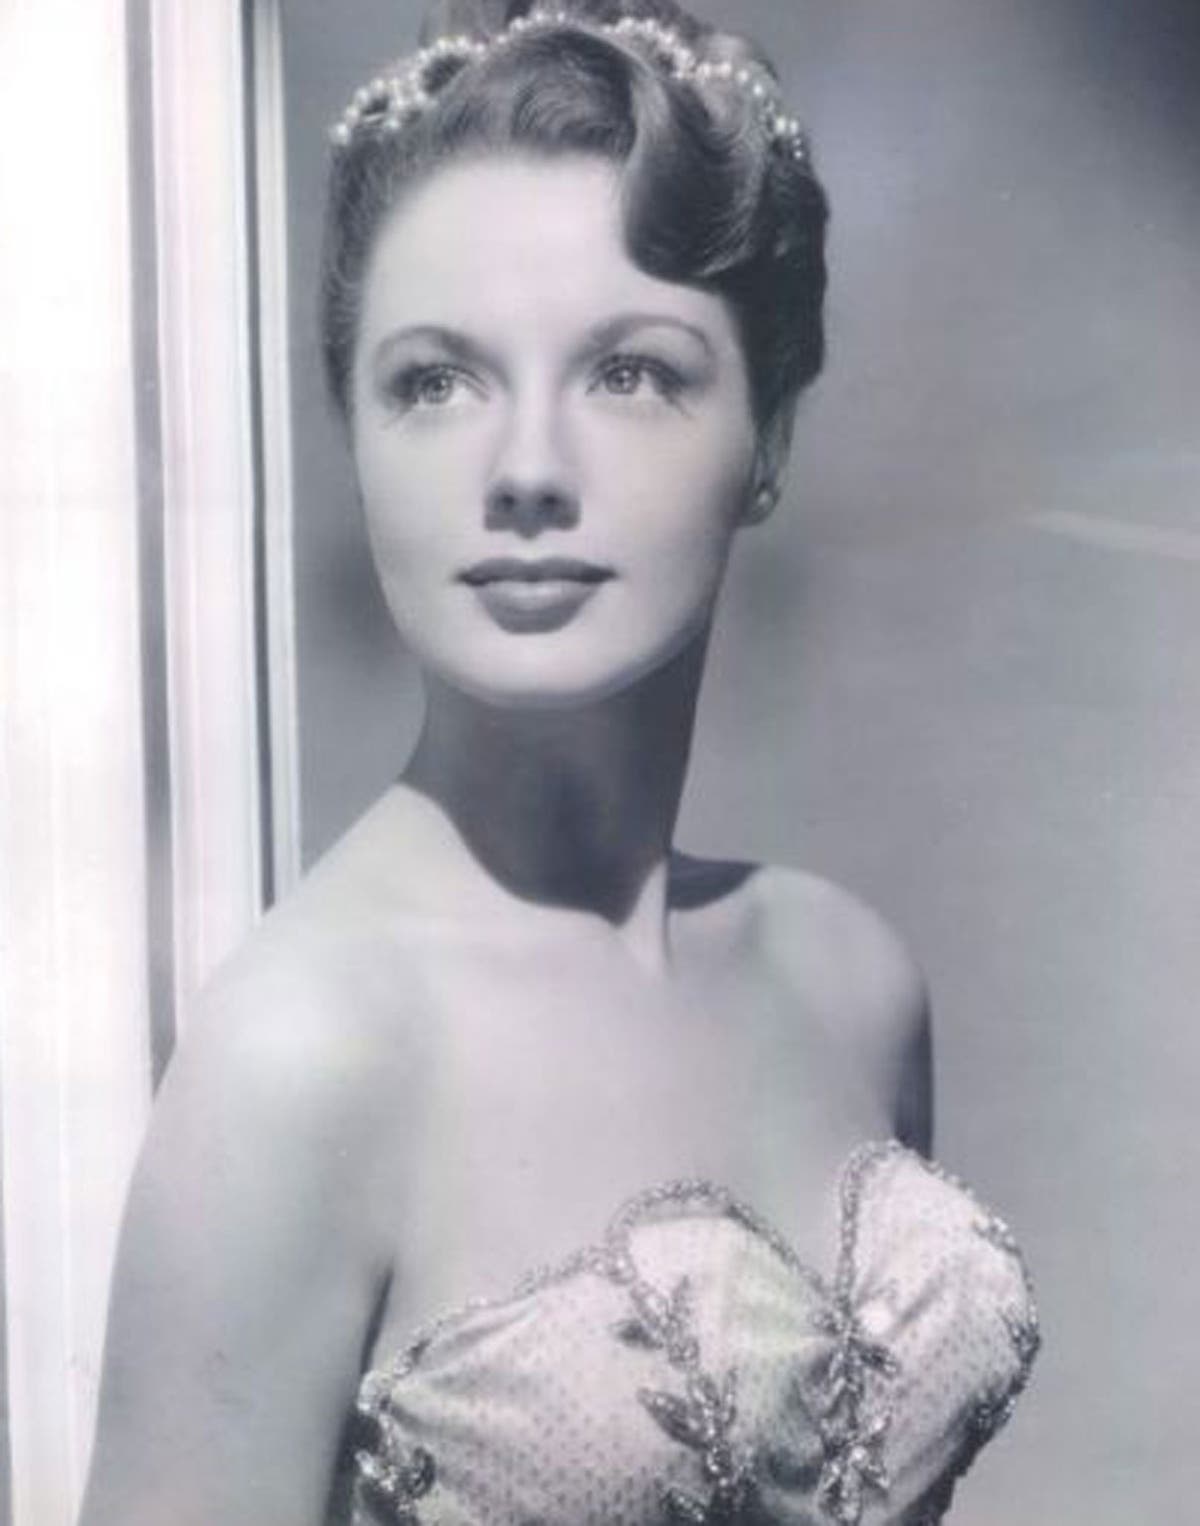 Virginia Gibson Singer Actress And Dancer Who Starred In Hit Musicals 4333